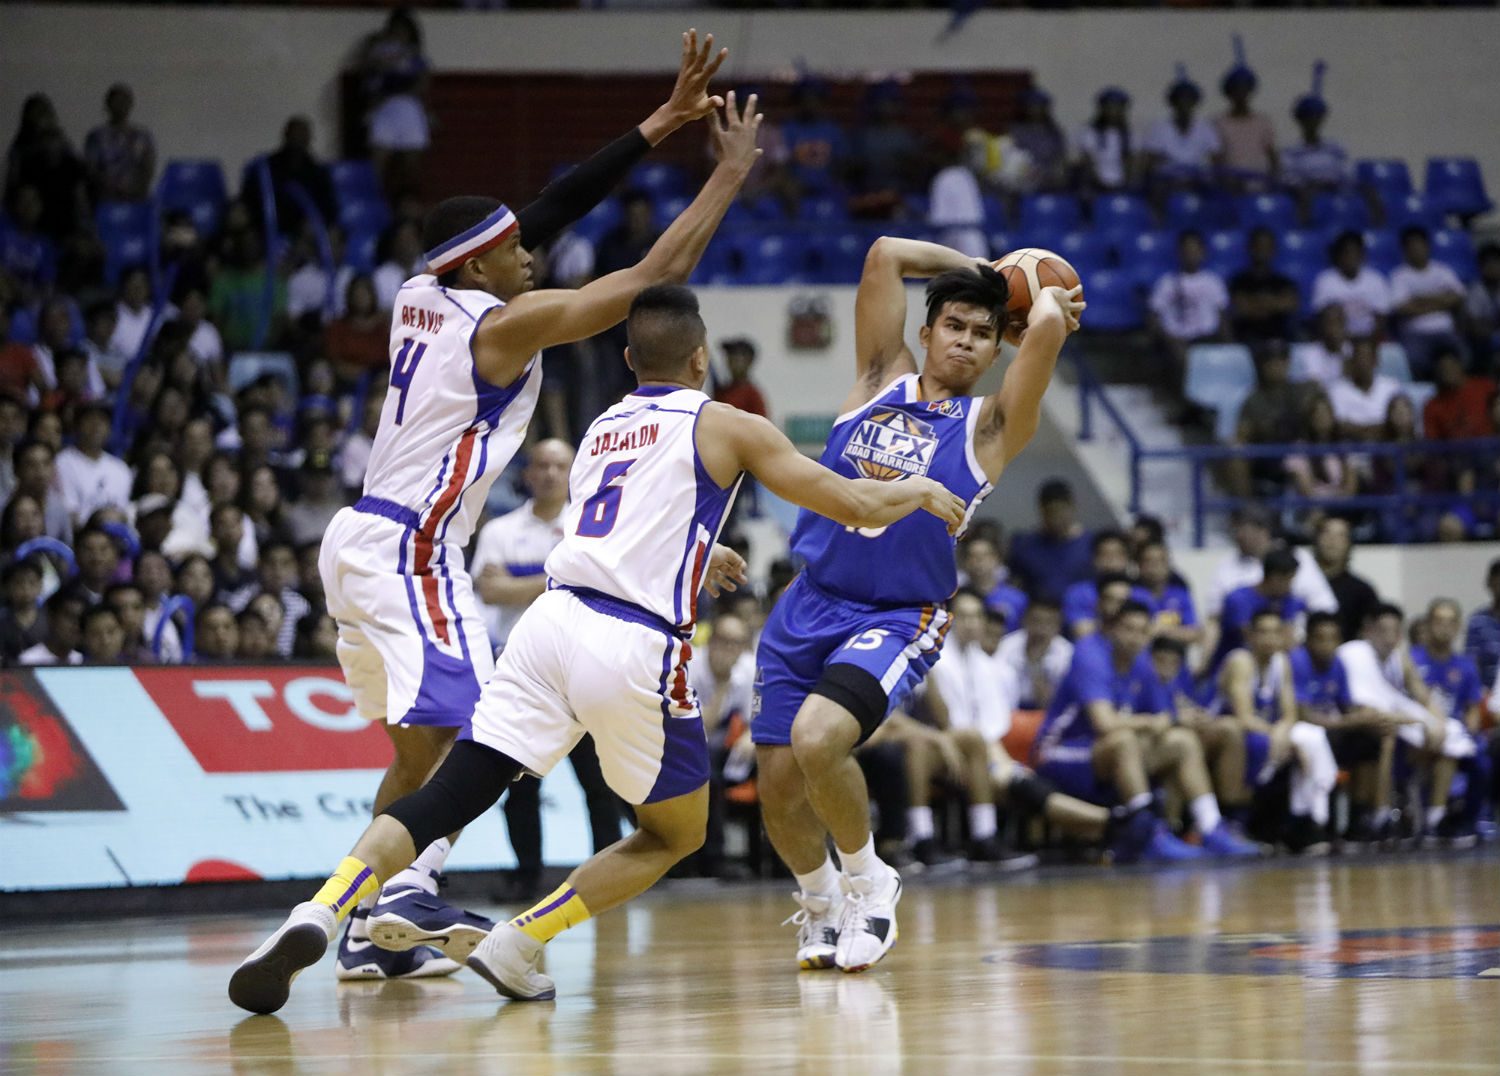 Magnolia catches fire late to beat NLEX in Game 5 for 3-2 semis lead